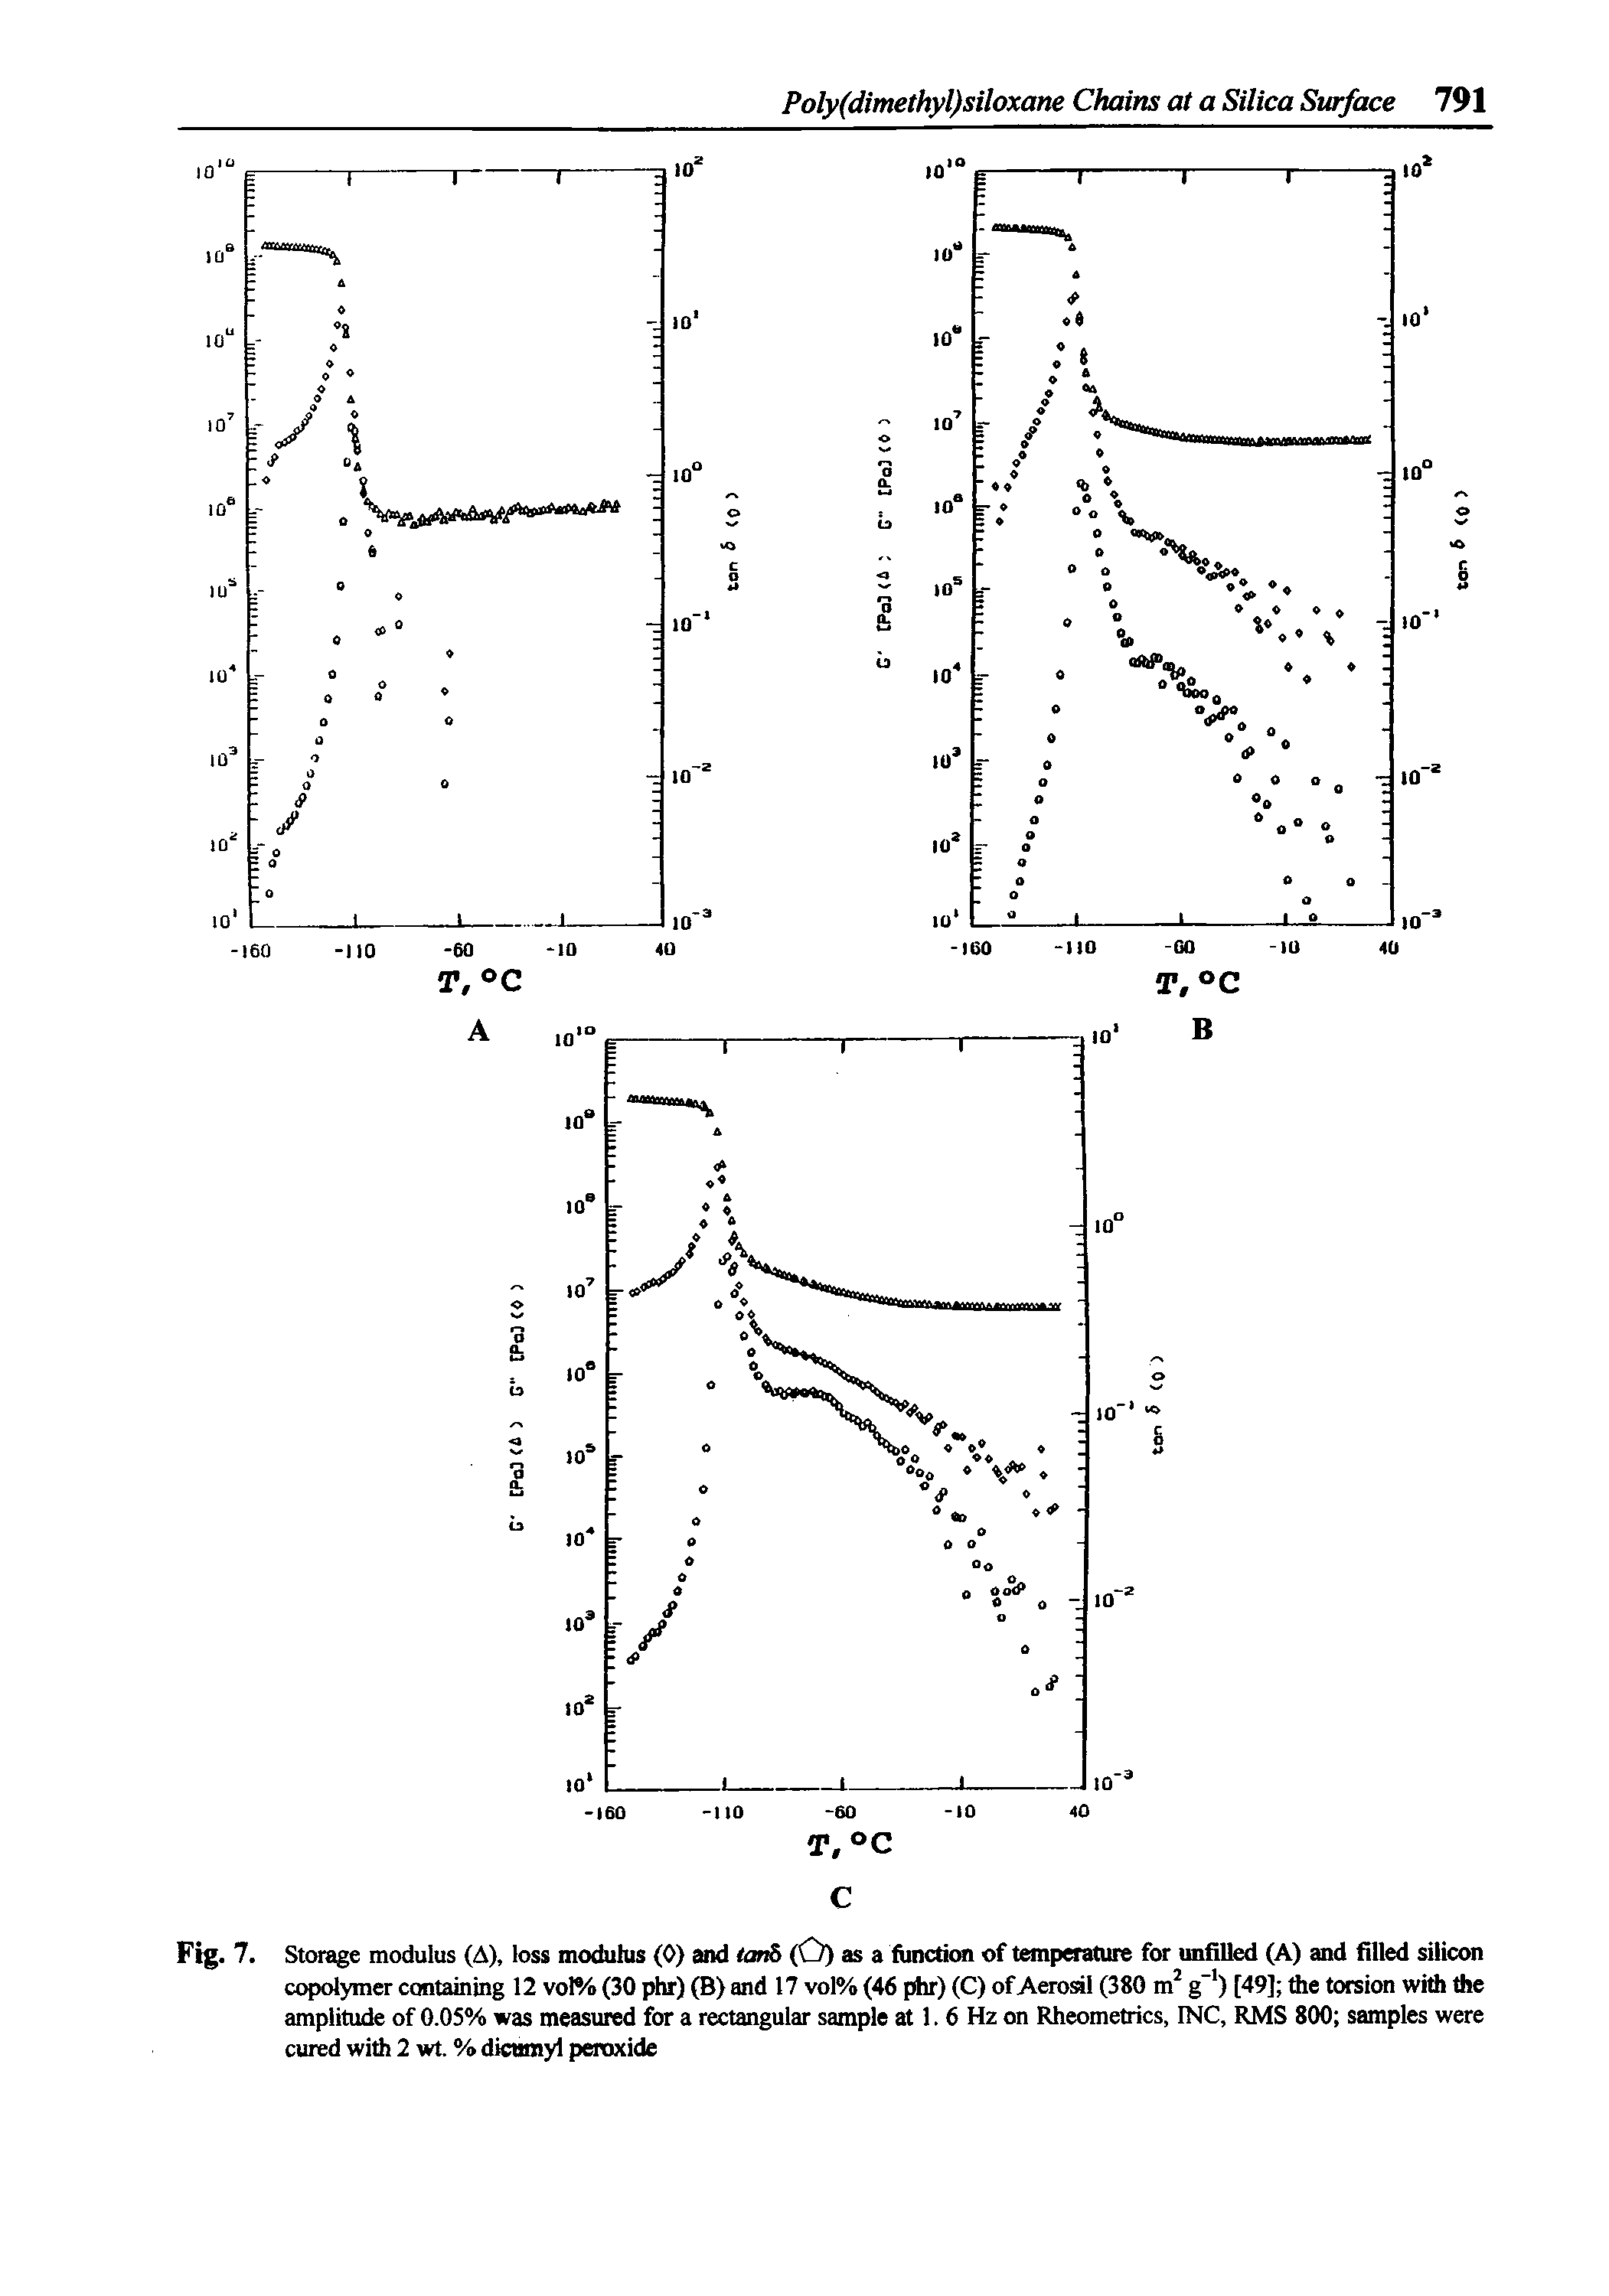 Fig. 7. Storage modulus (A), loss modulus (0) and tanS (O) as a function of temperature for unfilled (A) and filled silicon copolymer containing 12 vol% (30 phr) (B) and 17 vol% (46 phr) (C) of Aerosal (380 m g ) [49] the torsion widi the amplitude of 0.05% was measured for a rectangular sample at 1. 6 Hz on Rheometrics, INC, RMS 800 samples were cured with 2 wt. % dicumyl peroxide...